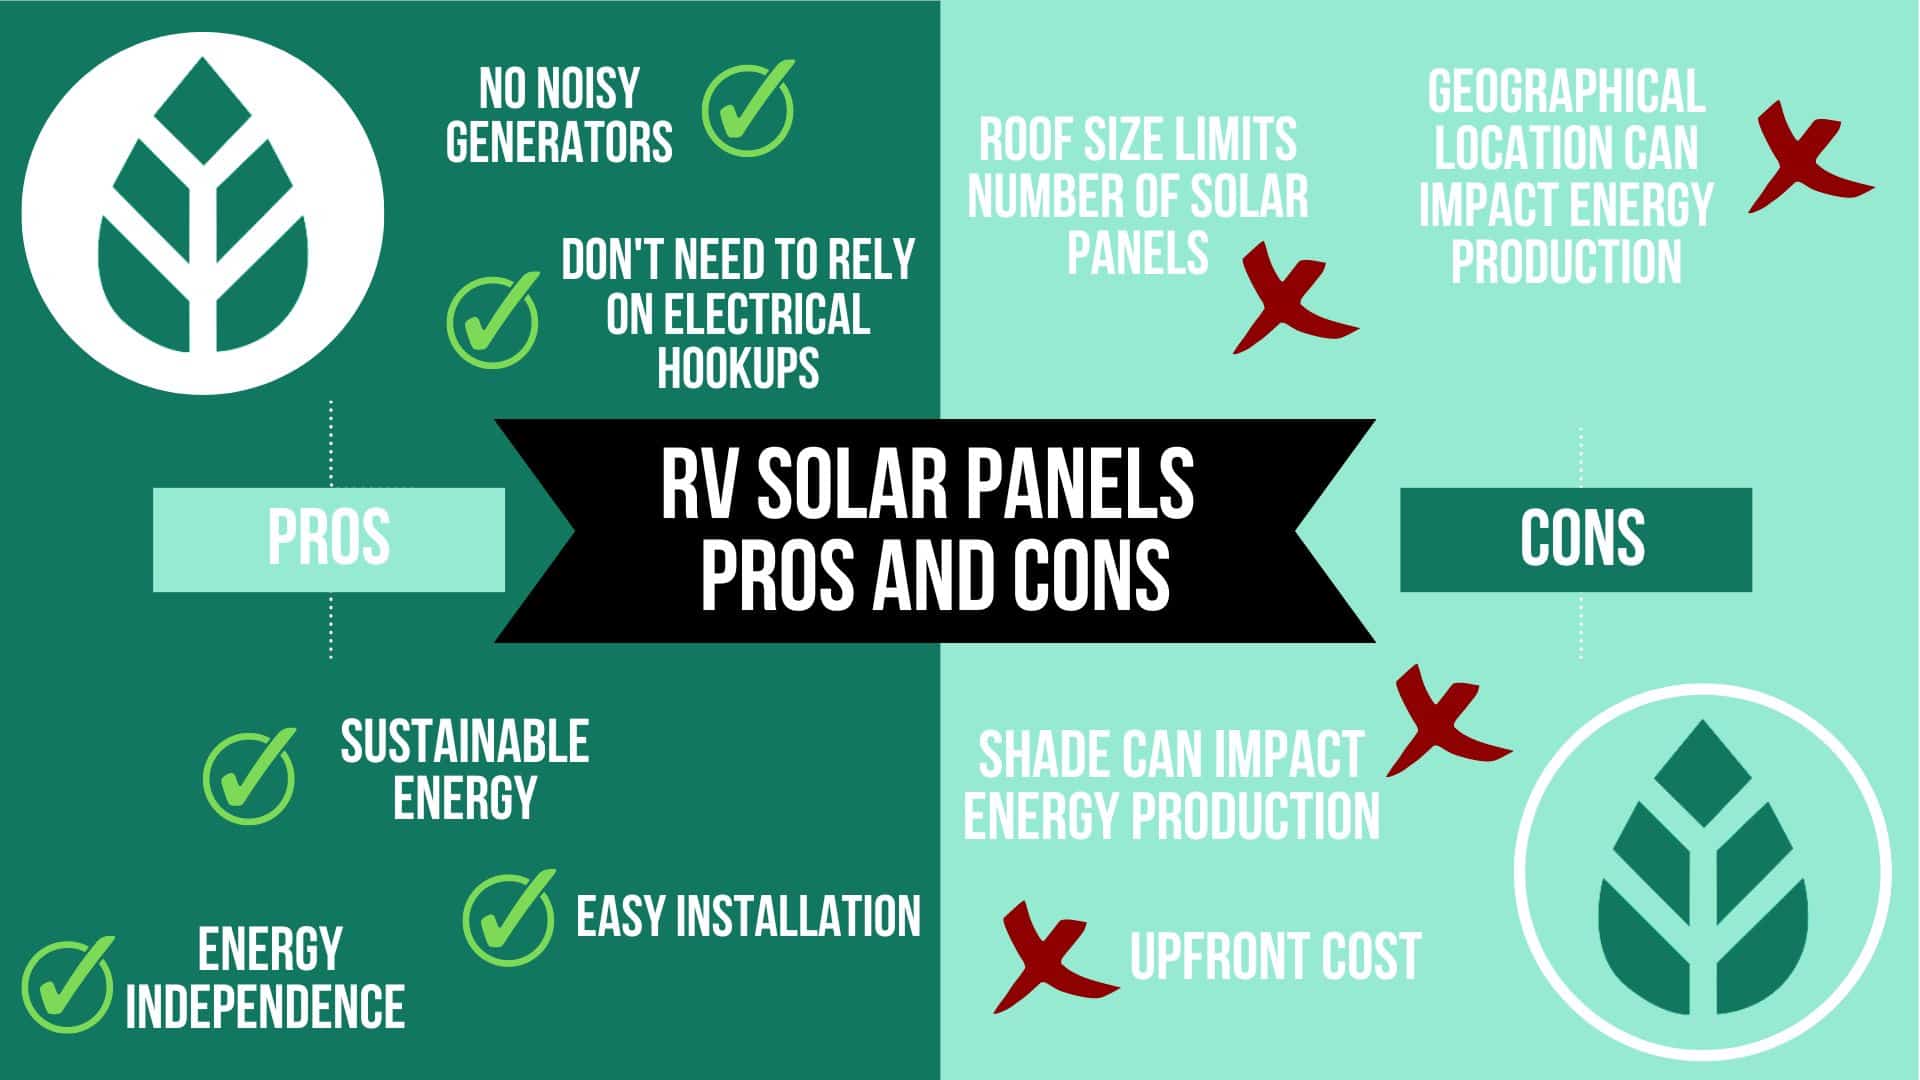 RV solar panels pros and cons